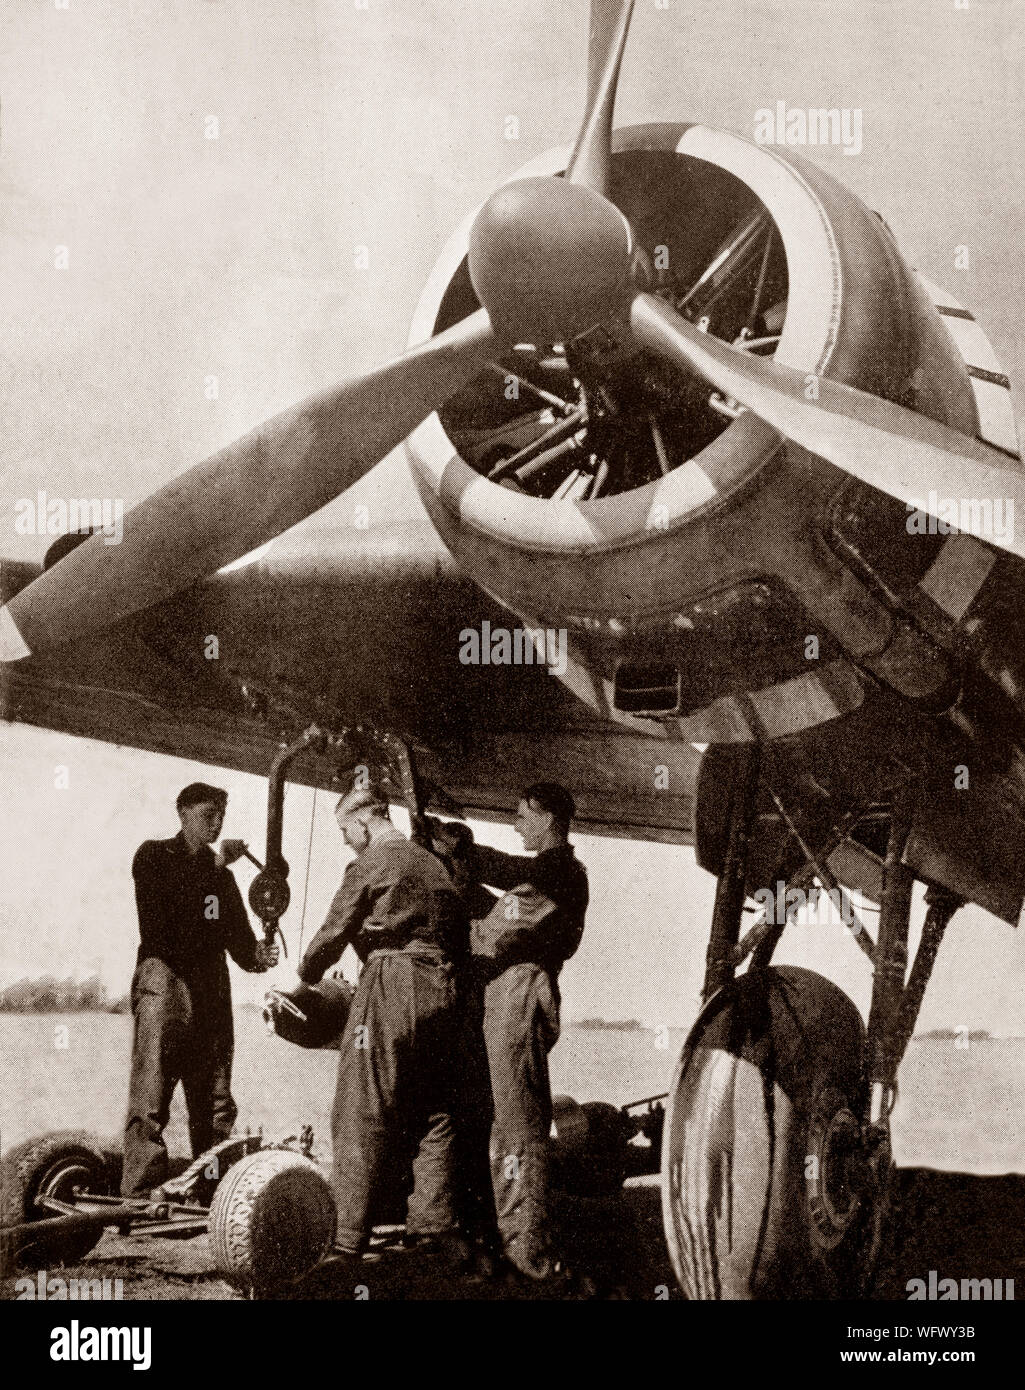 Bombs being loaded onto a Handley Page HP.52 Hampden,  a British twin-engine medium bomber of the Royal Air Force, often referred to by aircrews as the 'Flying Suitcase' because of its cramped crew conditions. It served in the early stages of the Second World War, bearing the brunt of the early bombing war over Europe, taking part in the first night raid on Berlin and the first 1,000-bomber raid on Cologne. It was retired from RAF Bomber Command service in late 1942, superseded by the larger four-engined heavy bomberslike the Avro Lancaster. Stock Photo